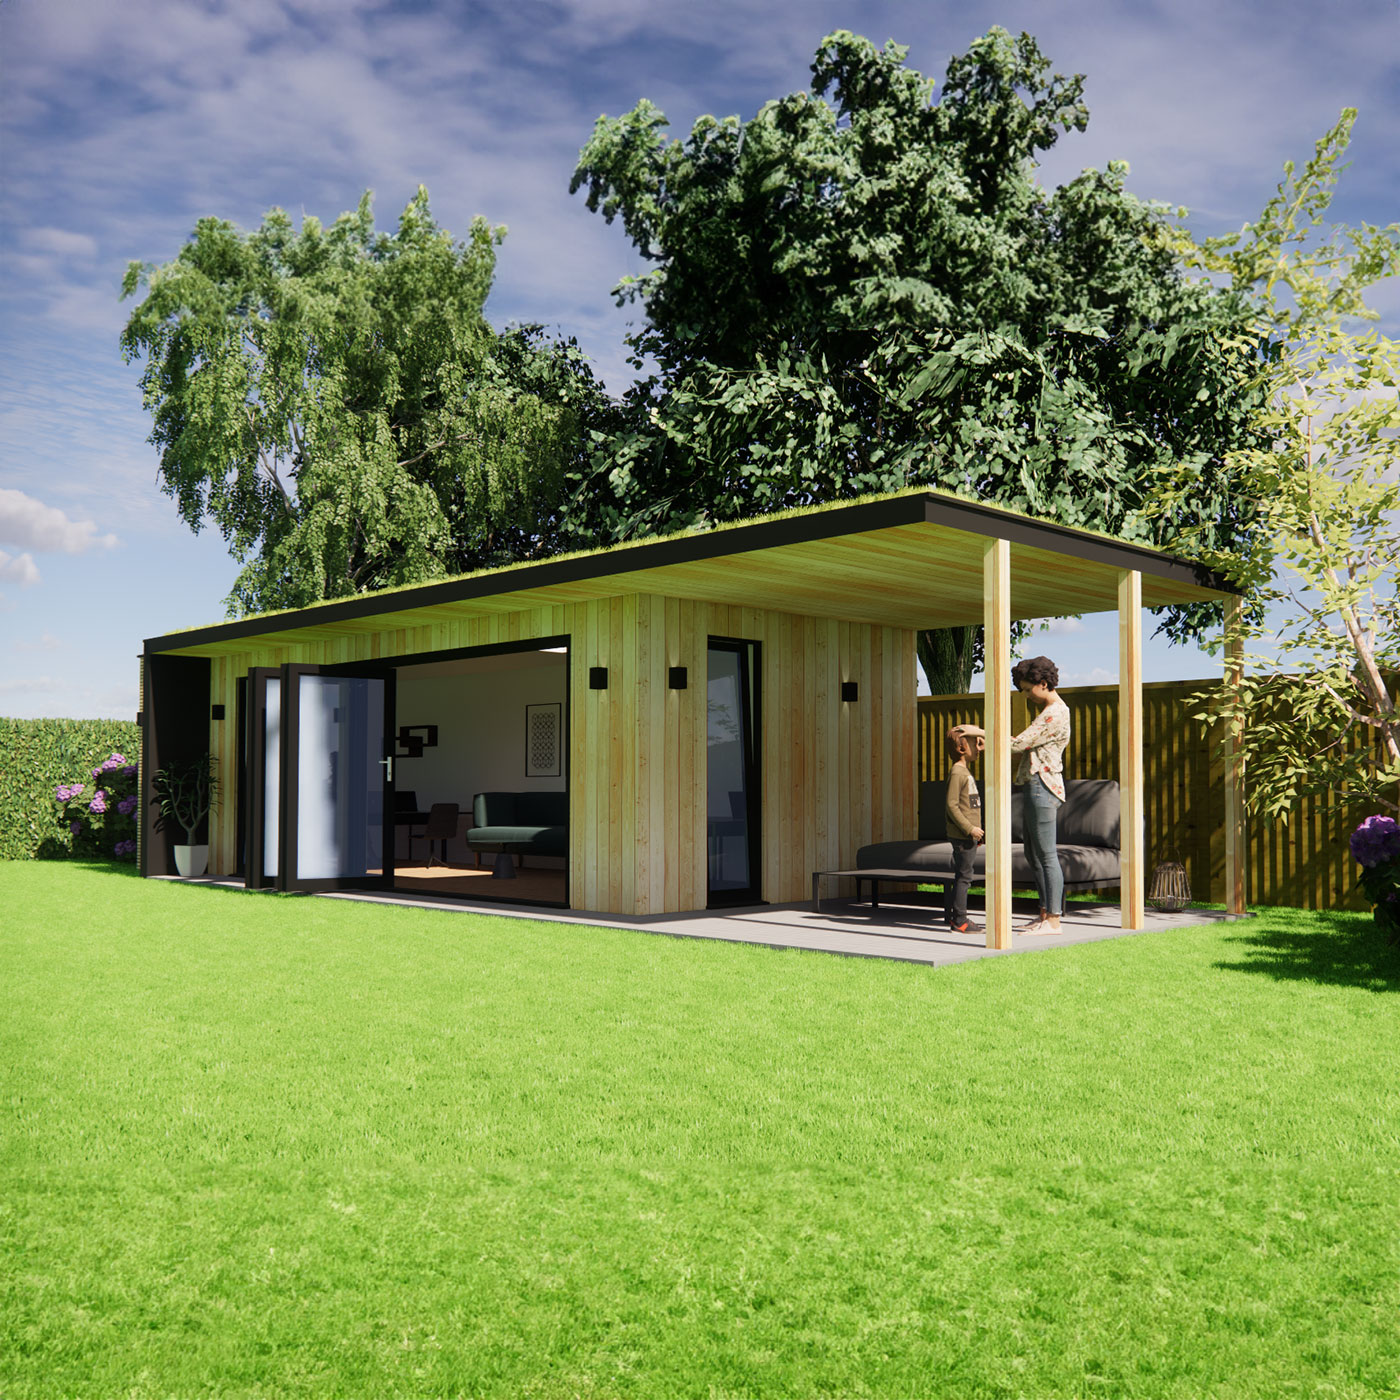 Visualisation of garden office with green roof 3.0m by 8.6m